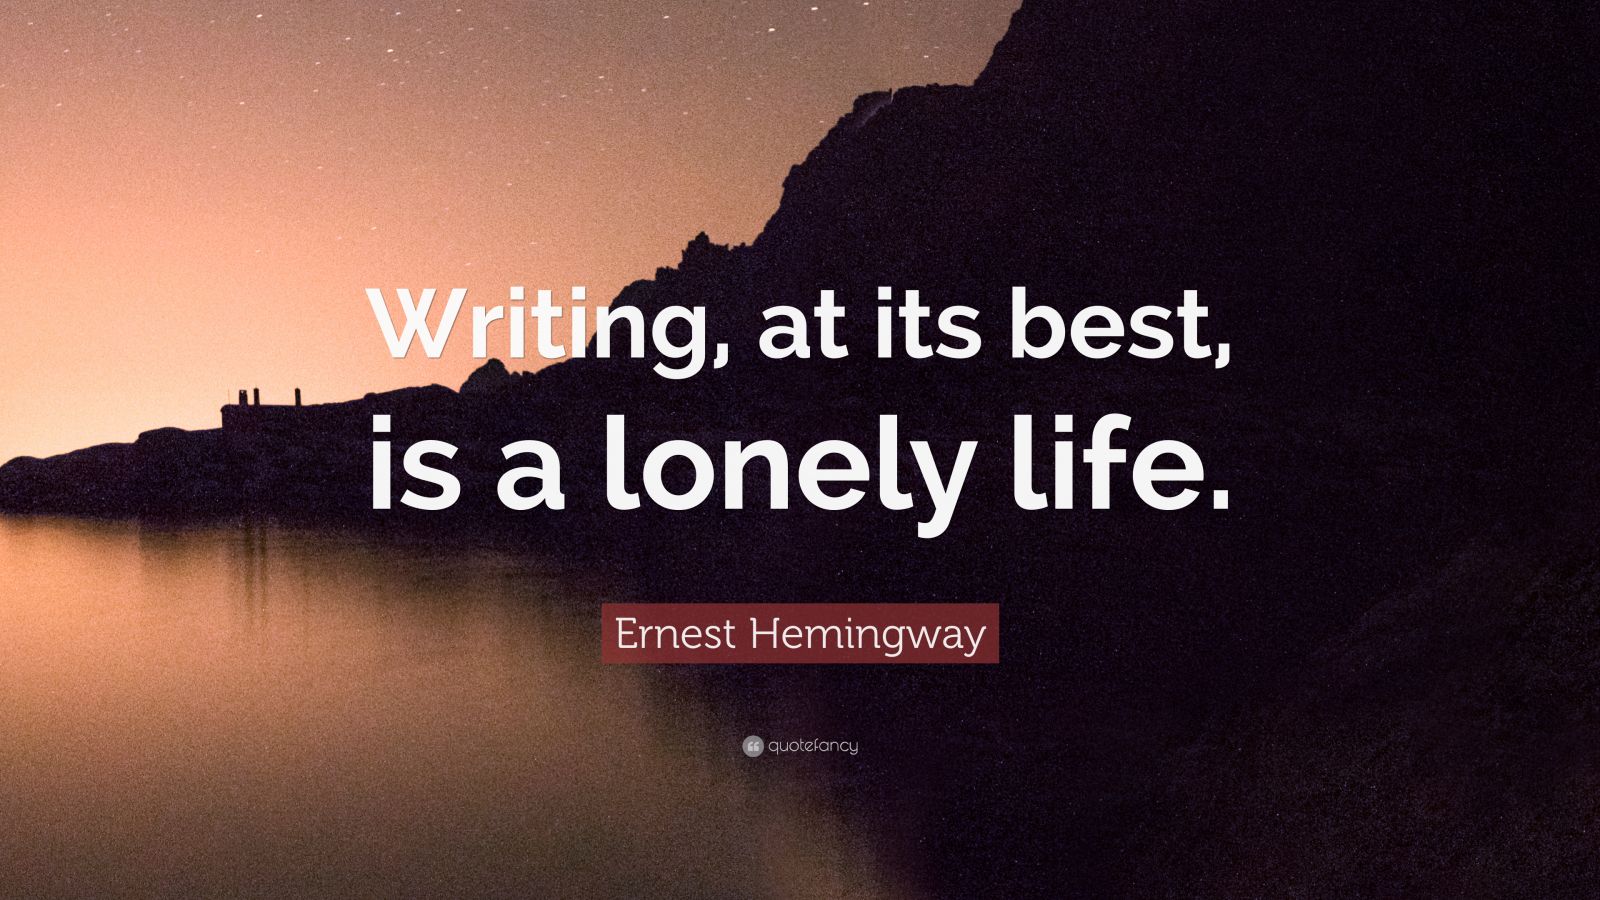 Ernest Hemingway Quote: "Writing, at its best, is a lonely life." (12 wallpapers) - Quotefancy